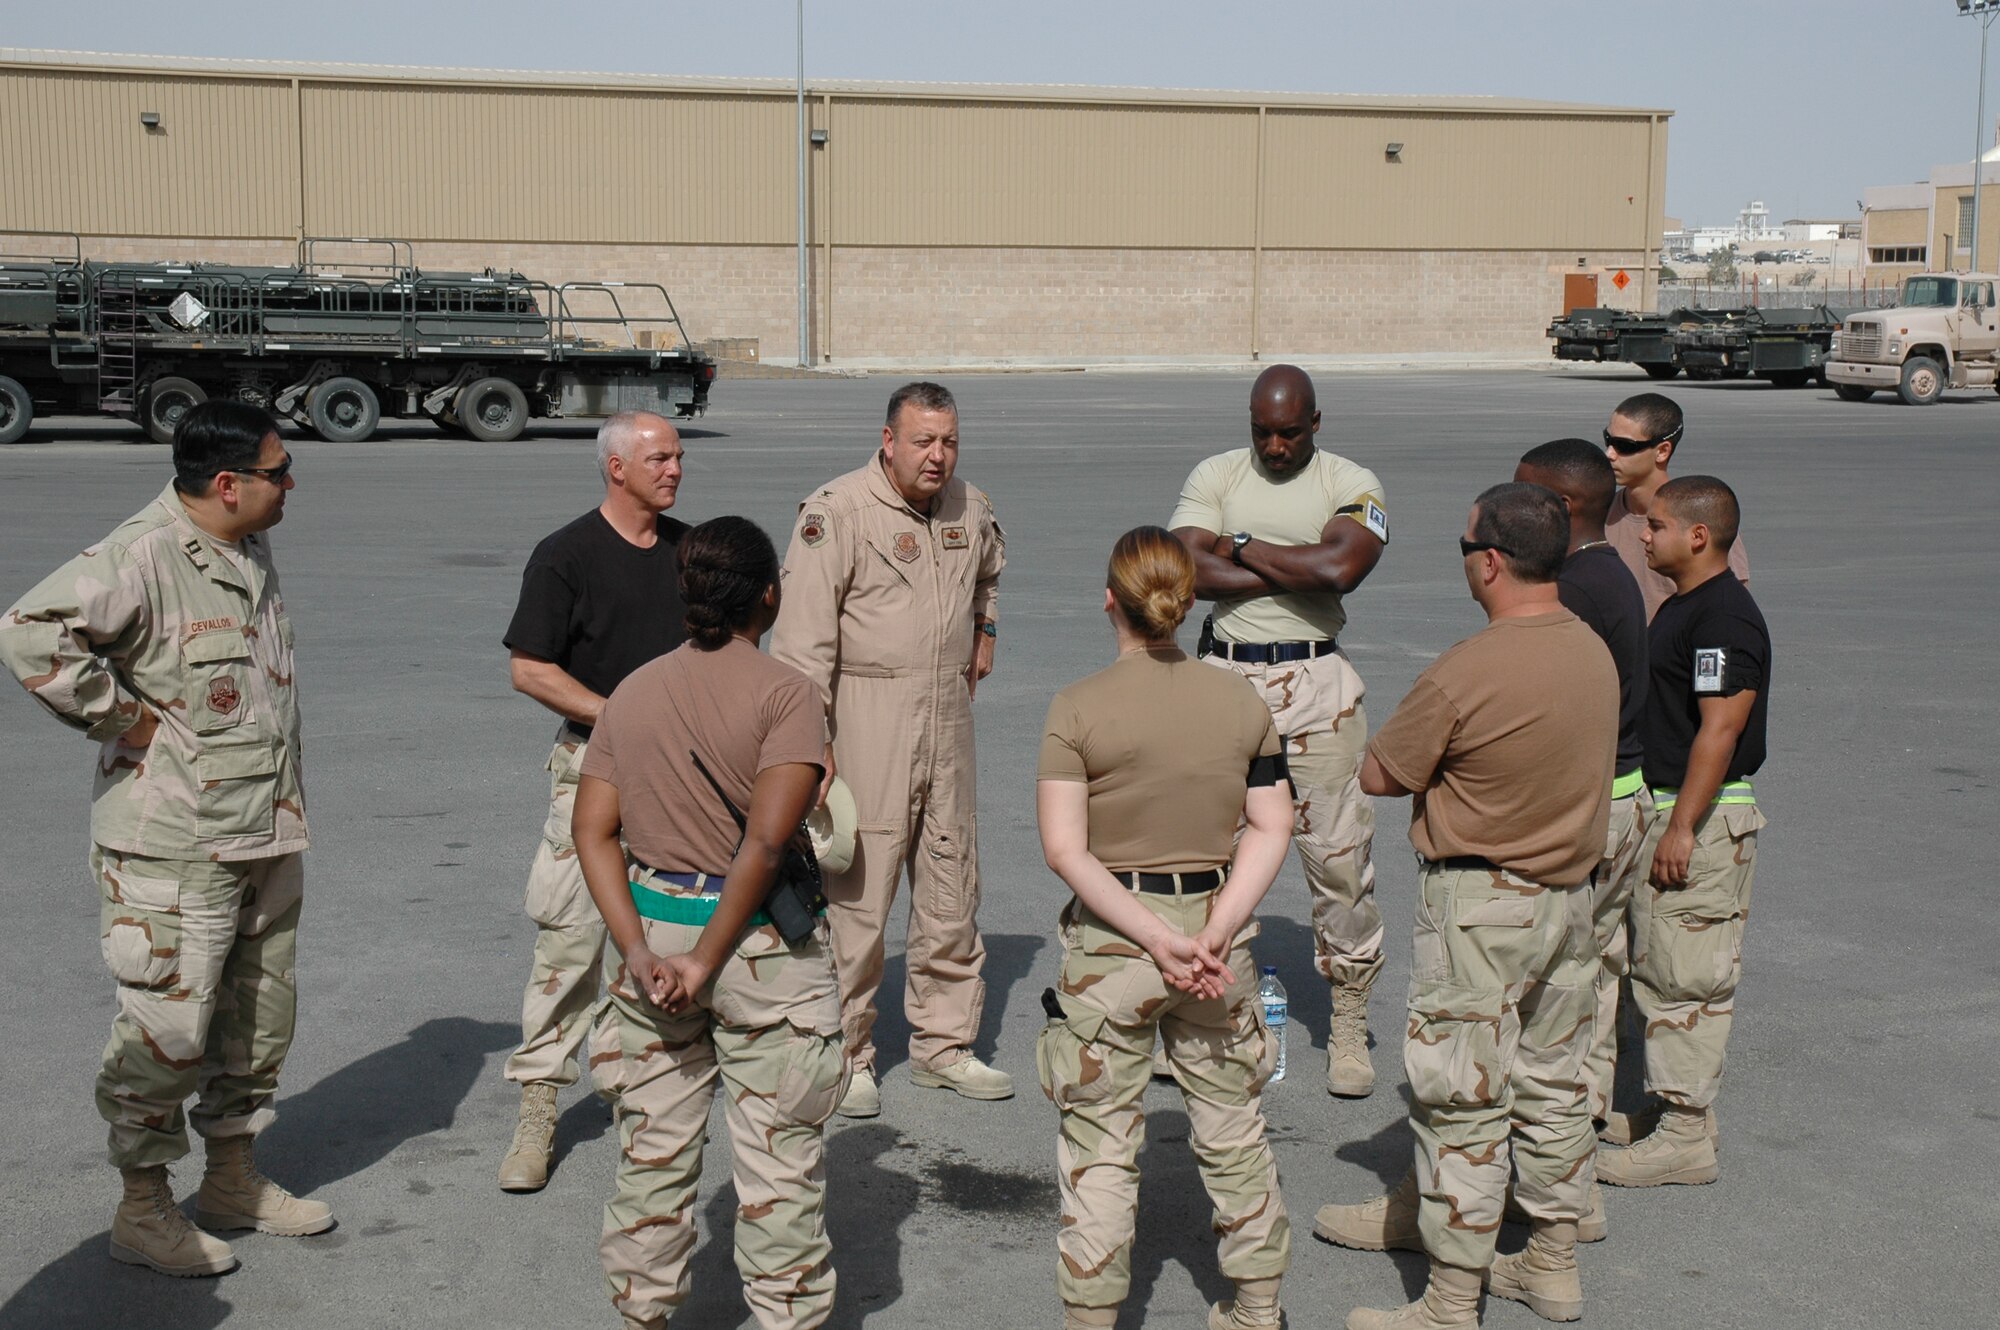 Col. Gary Cook, commander of the 315th Airlift Wing at Charleston AFB, S.C. (center), talks to deployed members of the Charleston based aerial port squadrons.  The colonel recently traveled to the Middle East to make a surprise visit to see his deployed troops as they were working in Kuwait.  (Photo by 1st Lt. Wayne Capps, USAFR)